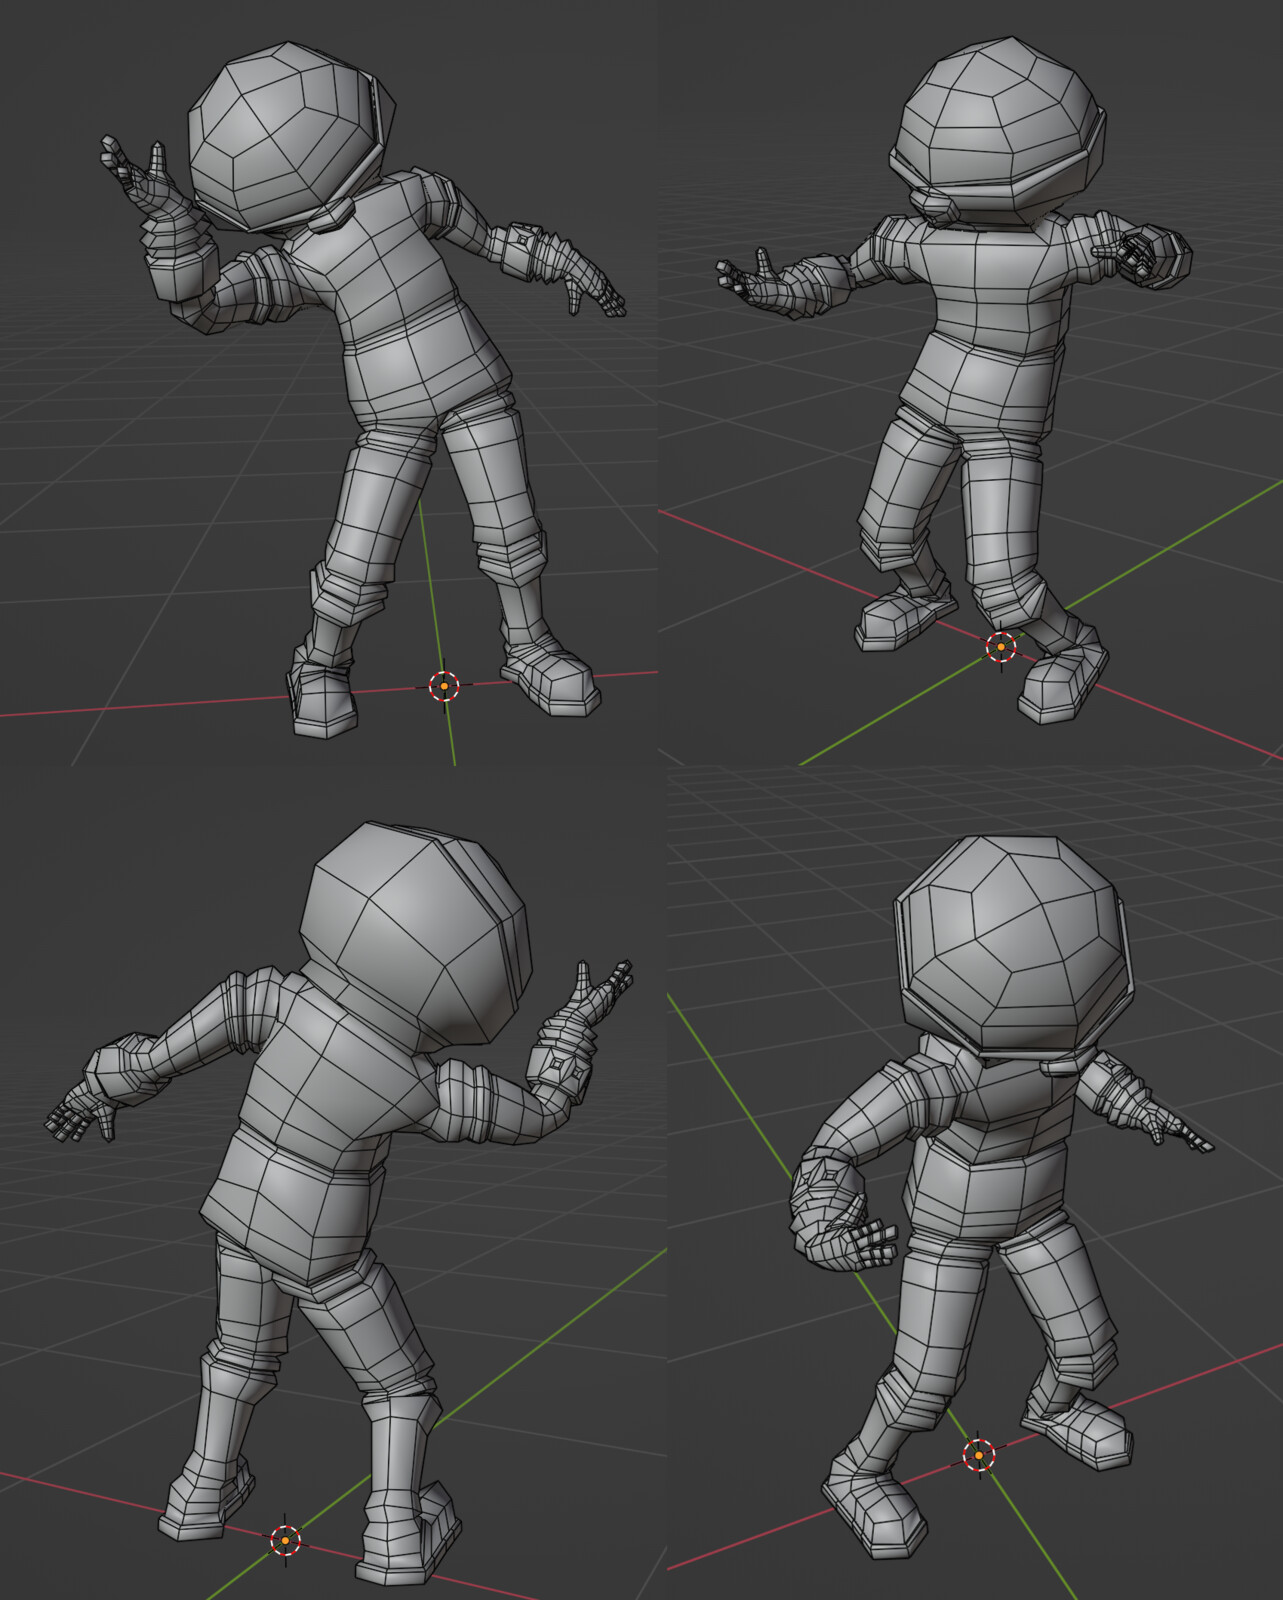 Astronaut wireframe model (blender viewport, lowpoly subdivision).